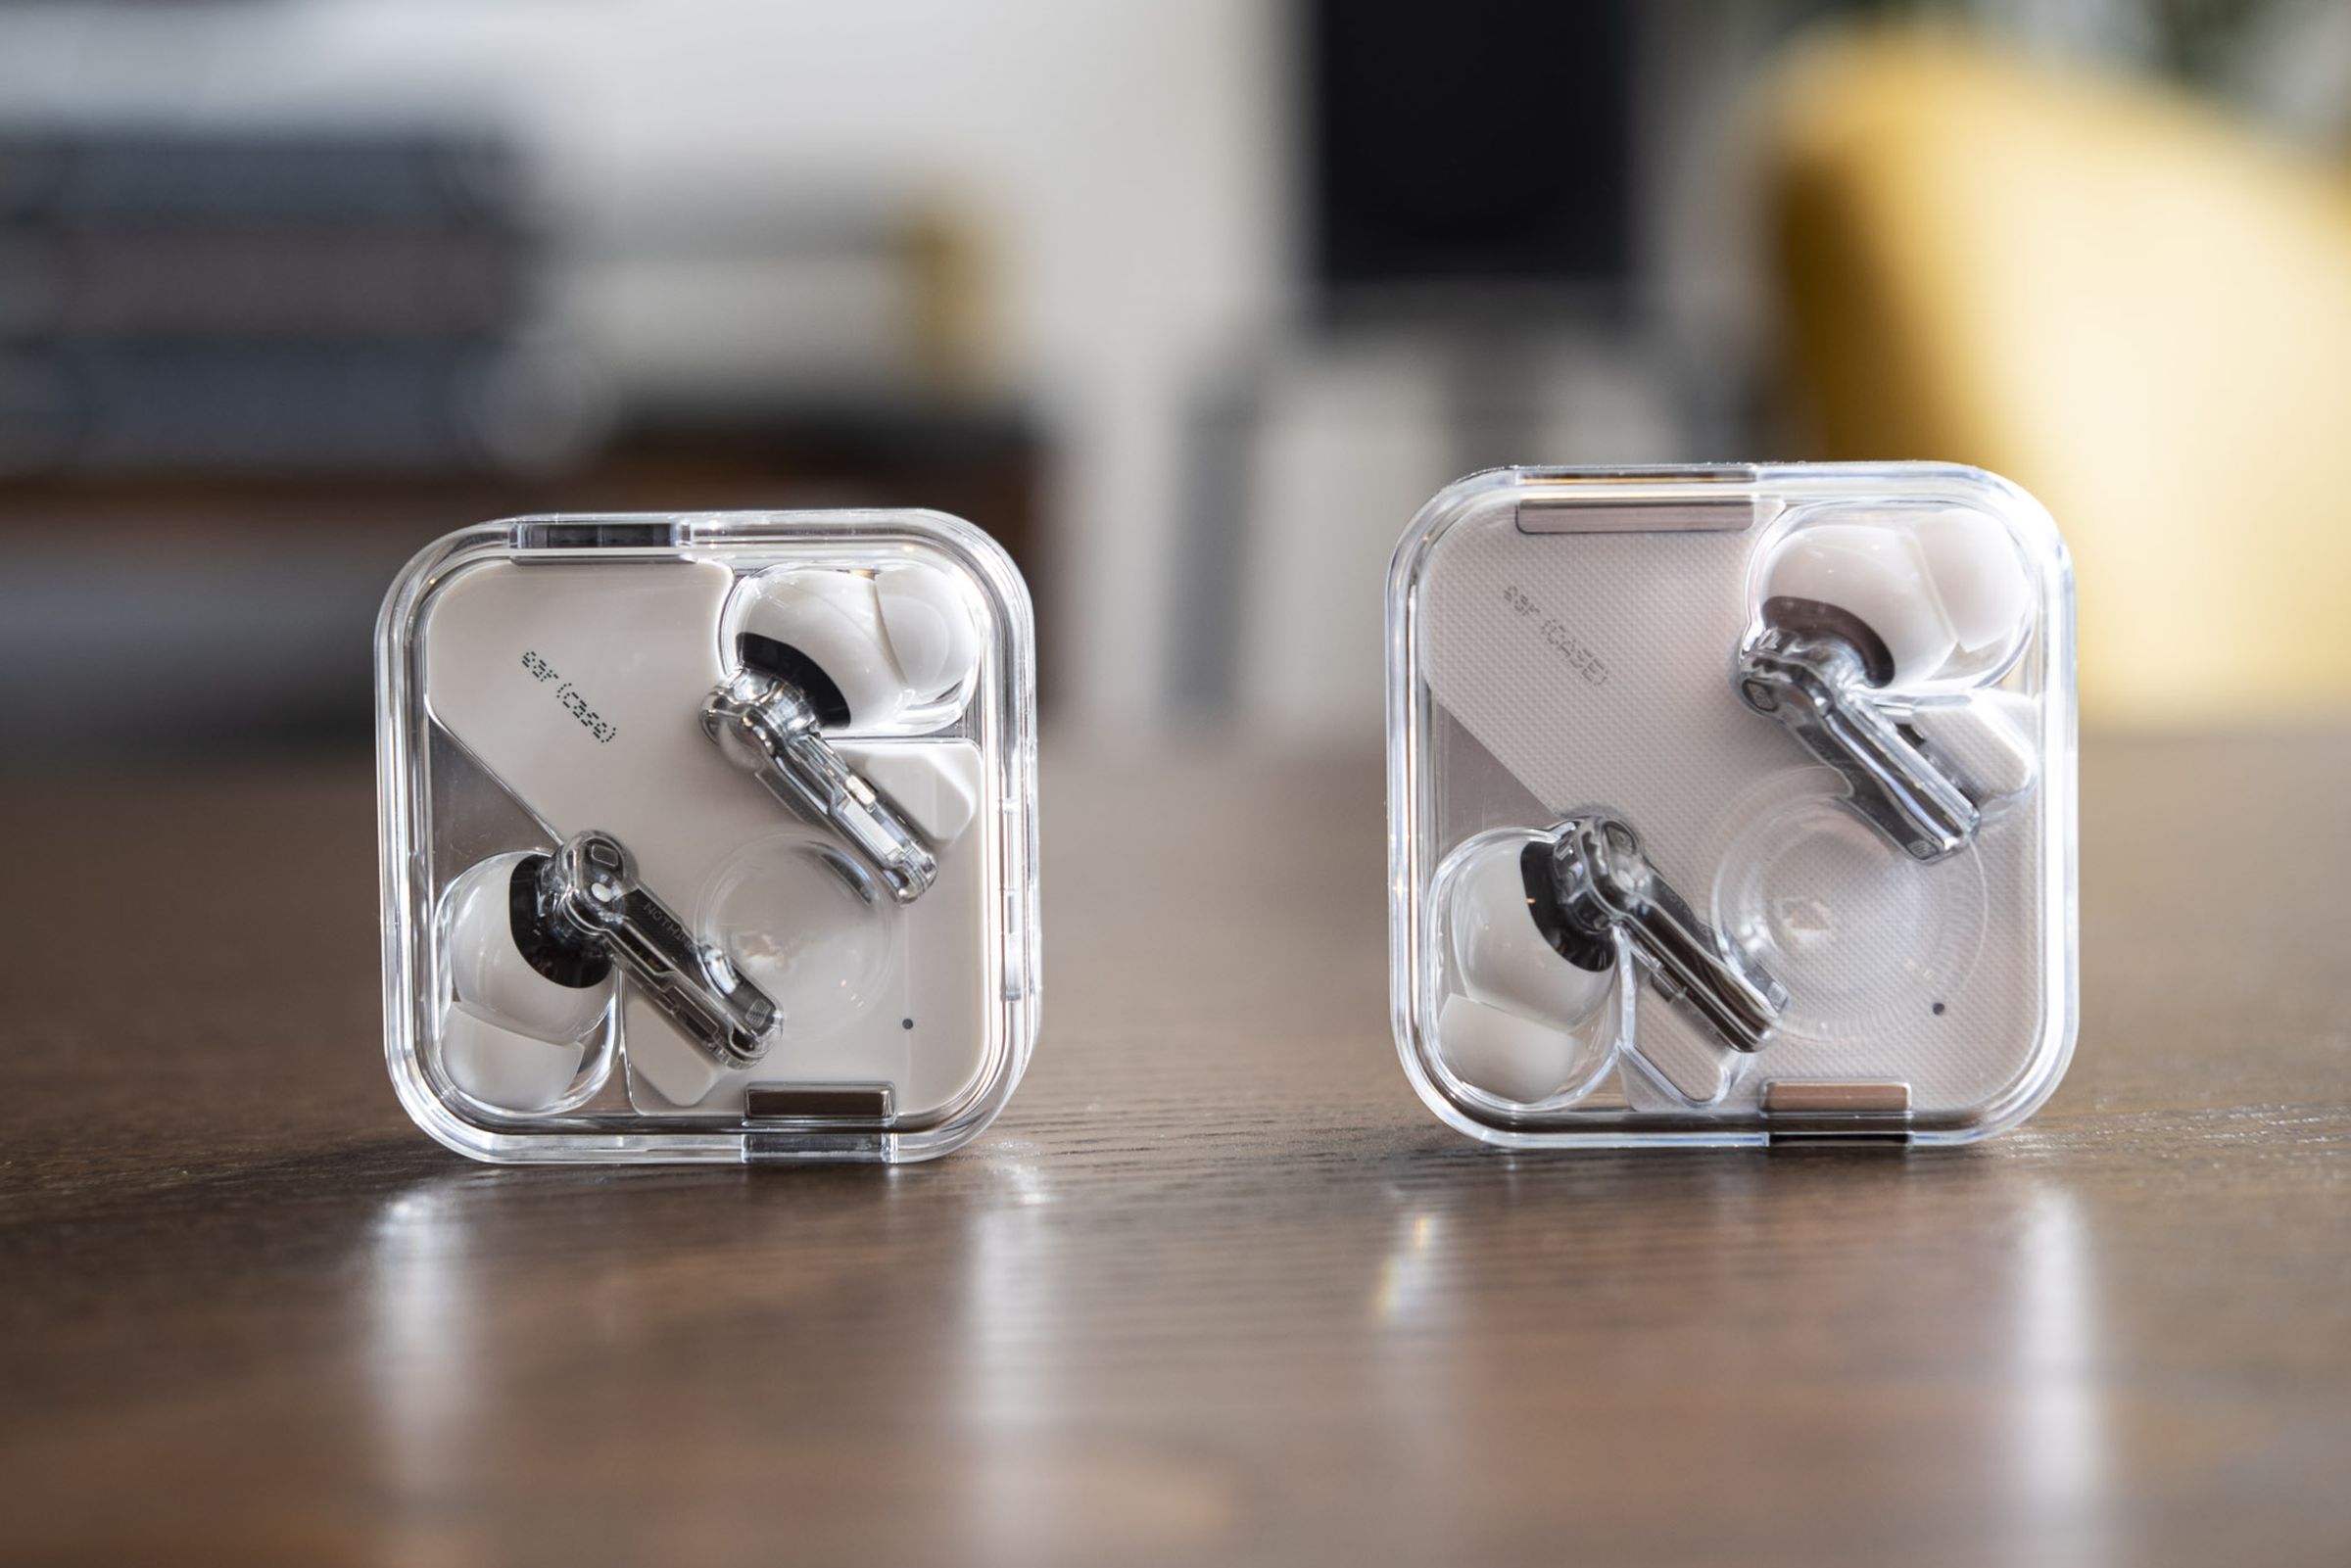 Ear 1 earbuds and Ear 2 earbuds in charging case.